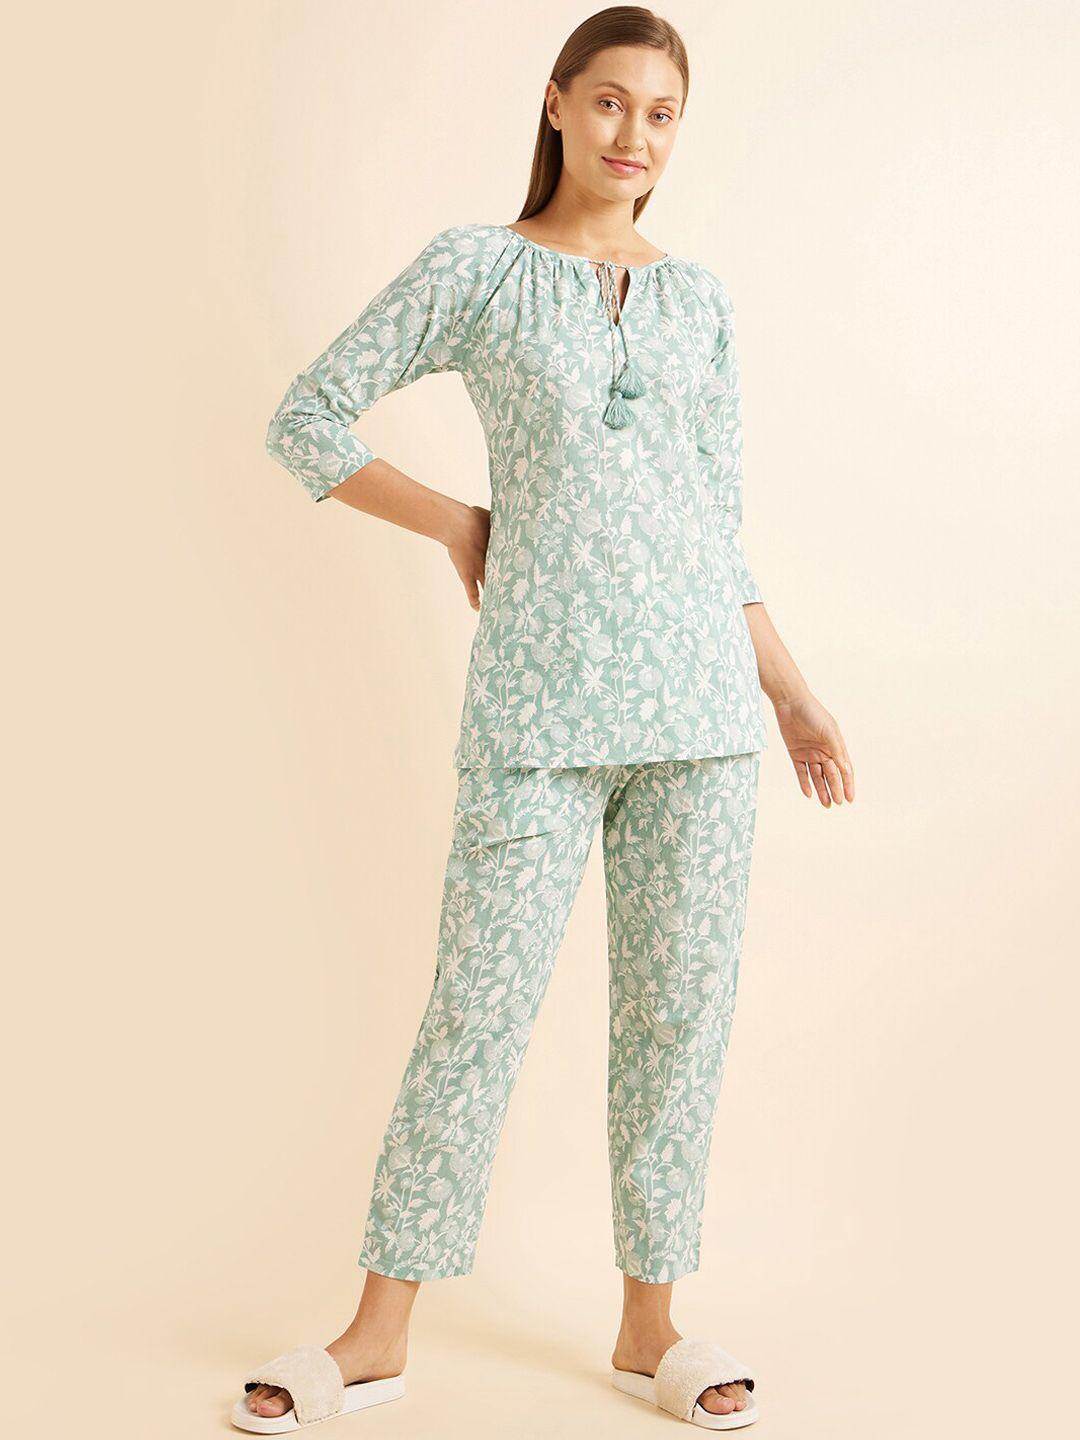 sweet dreams green & white floral printed pure cotton night suit